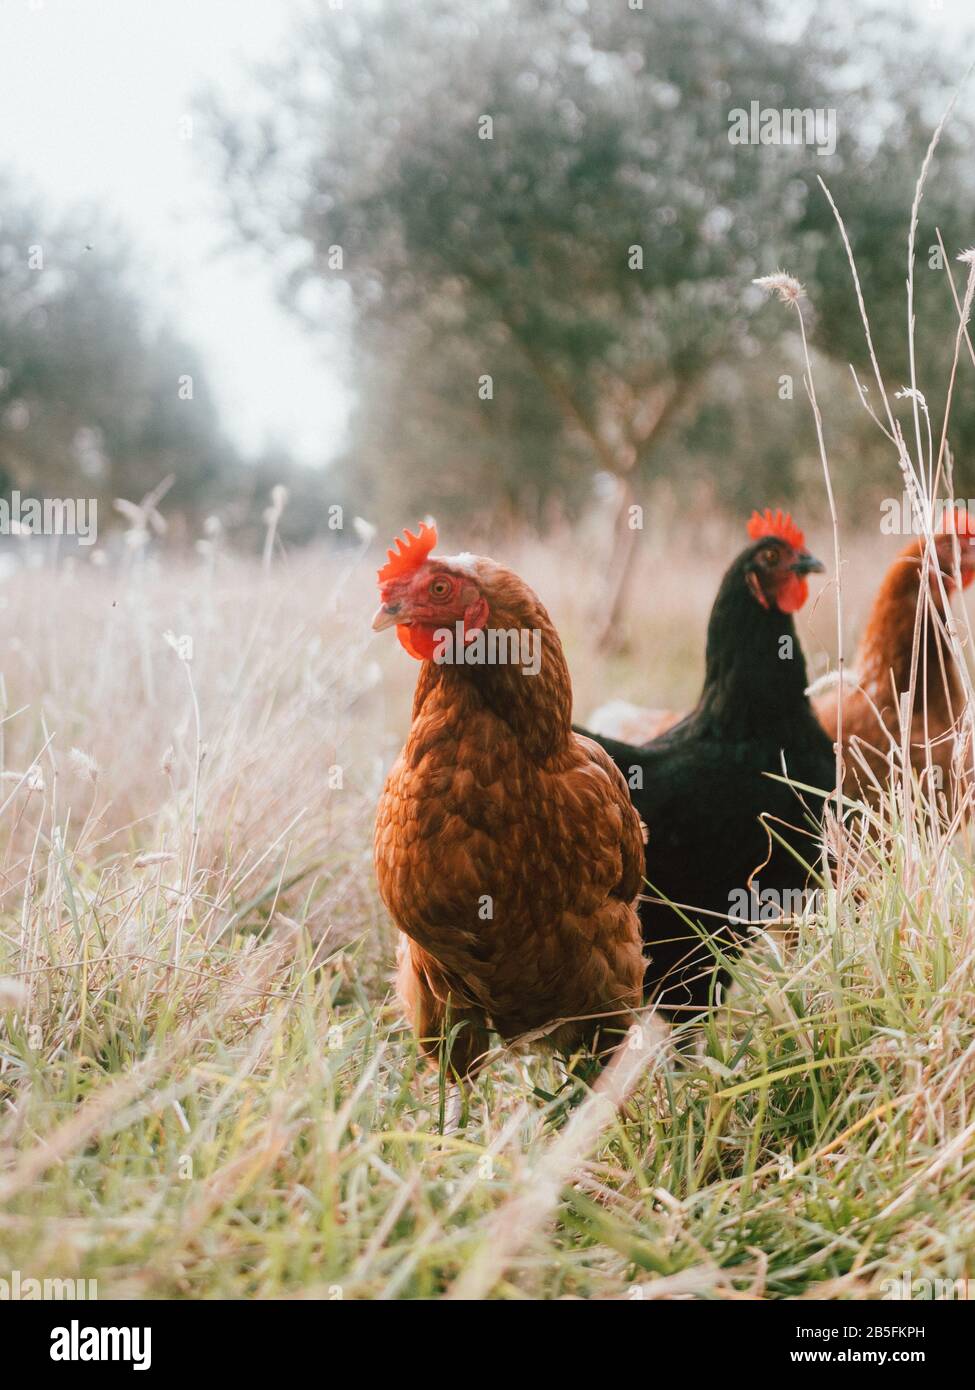 Some free-ranged chickens on an operational farm, wondering around the free, open farmland in Australia Stock Photo